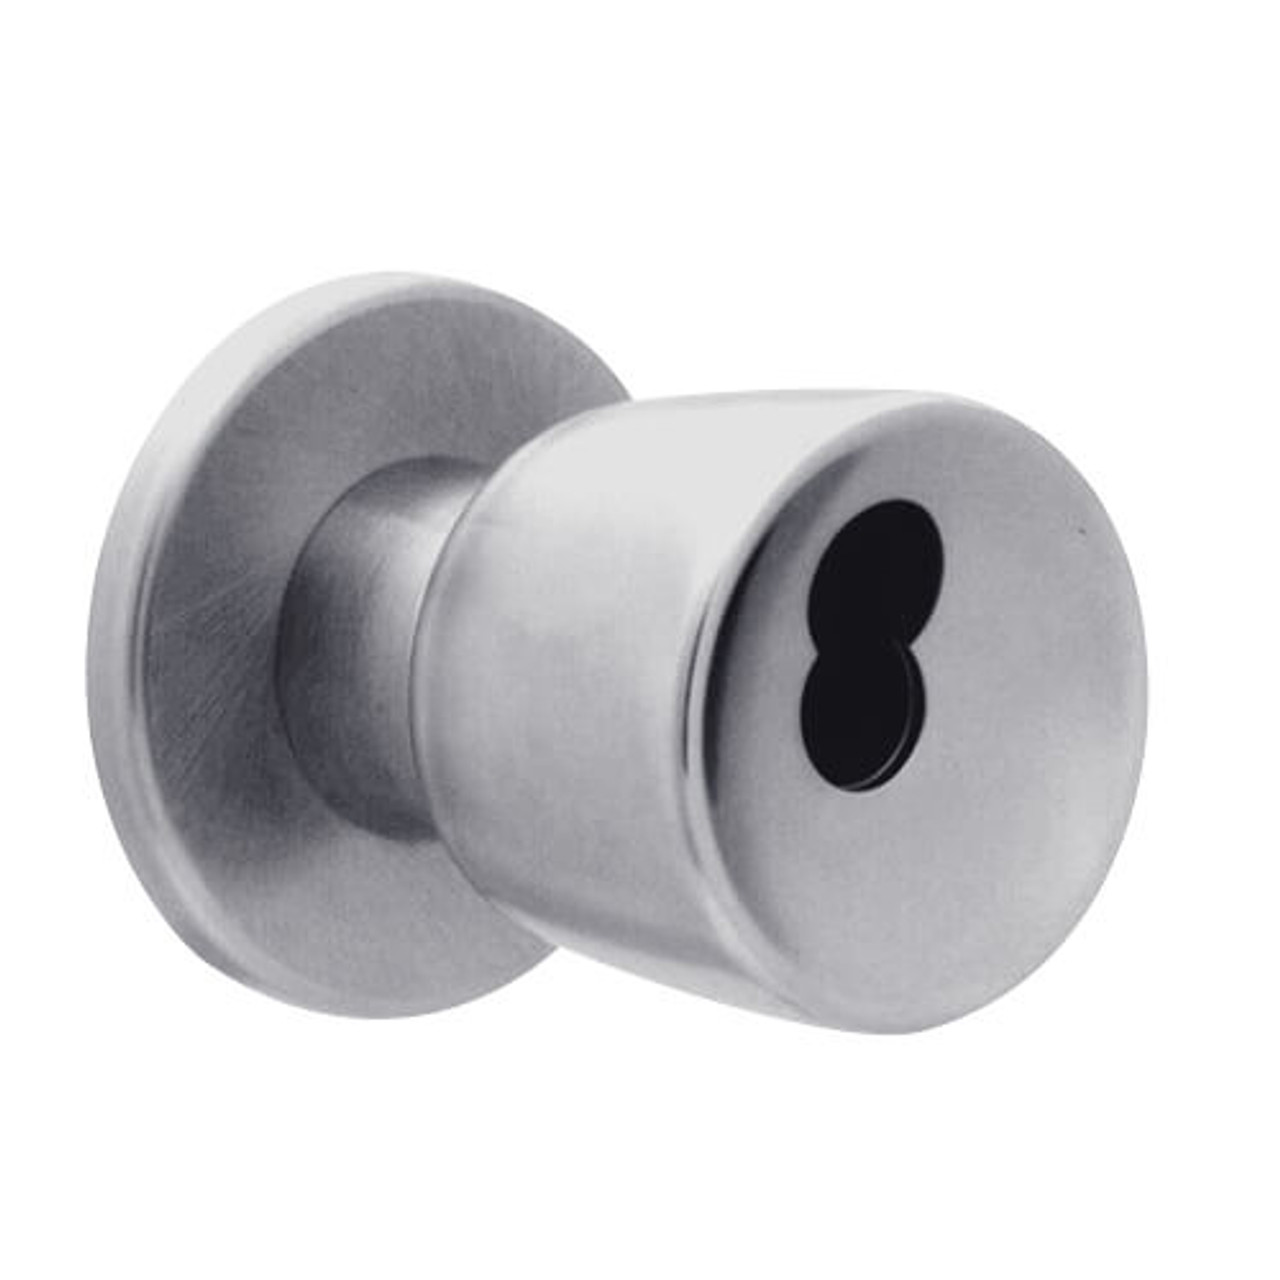 X511BD-EG-626 Falcon X Series Cylindrical Entry/Office Lock with Elite-Gala Knob Style in Satin Chrome Finish